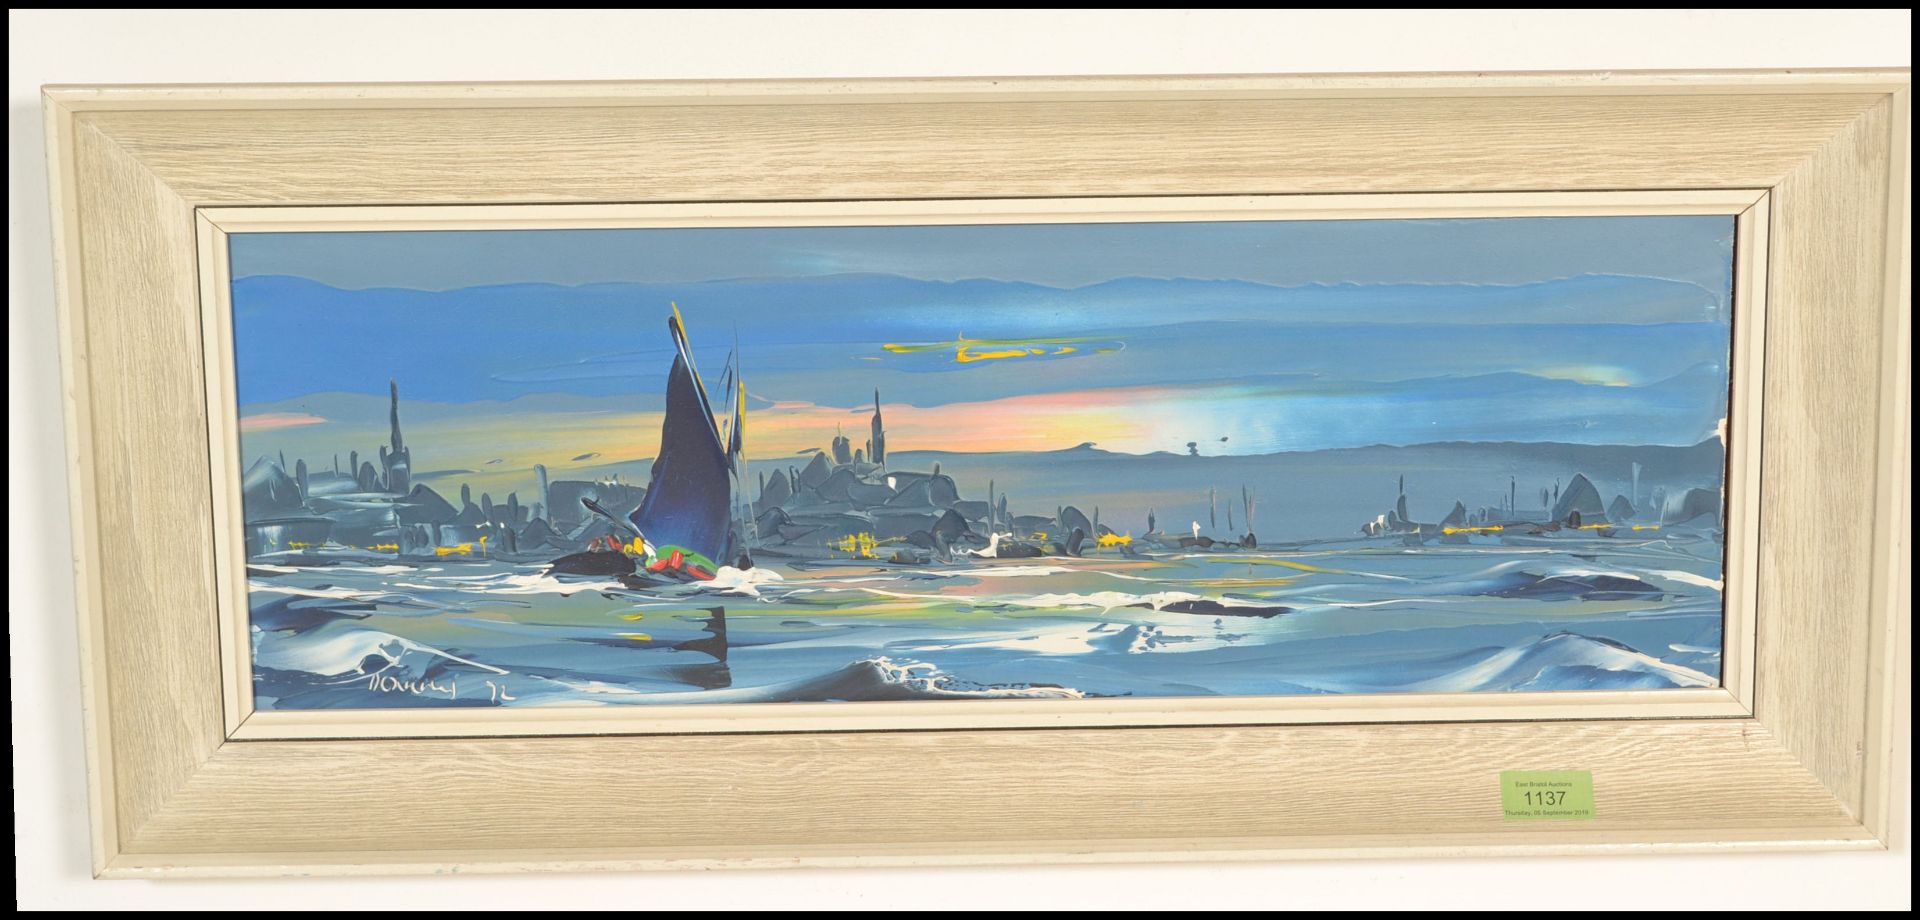 George R Deakins - Panoramic coastal scene with yachts, impasto oil on board picture painting,